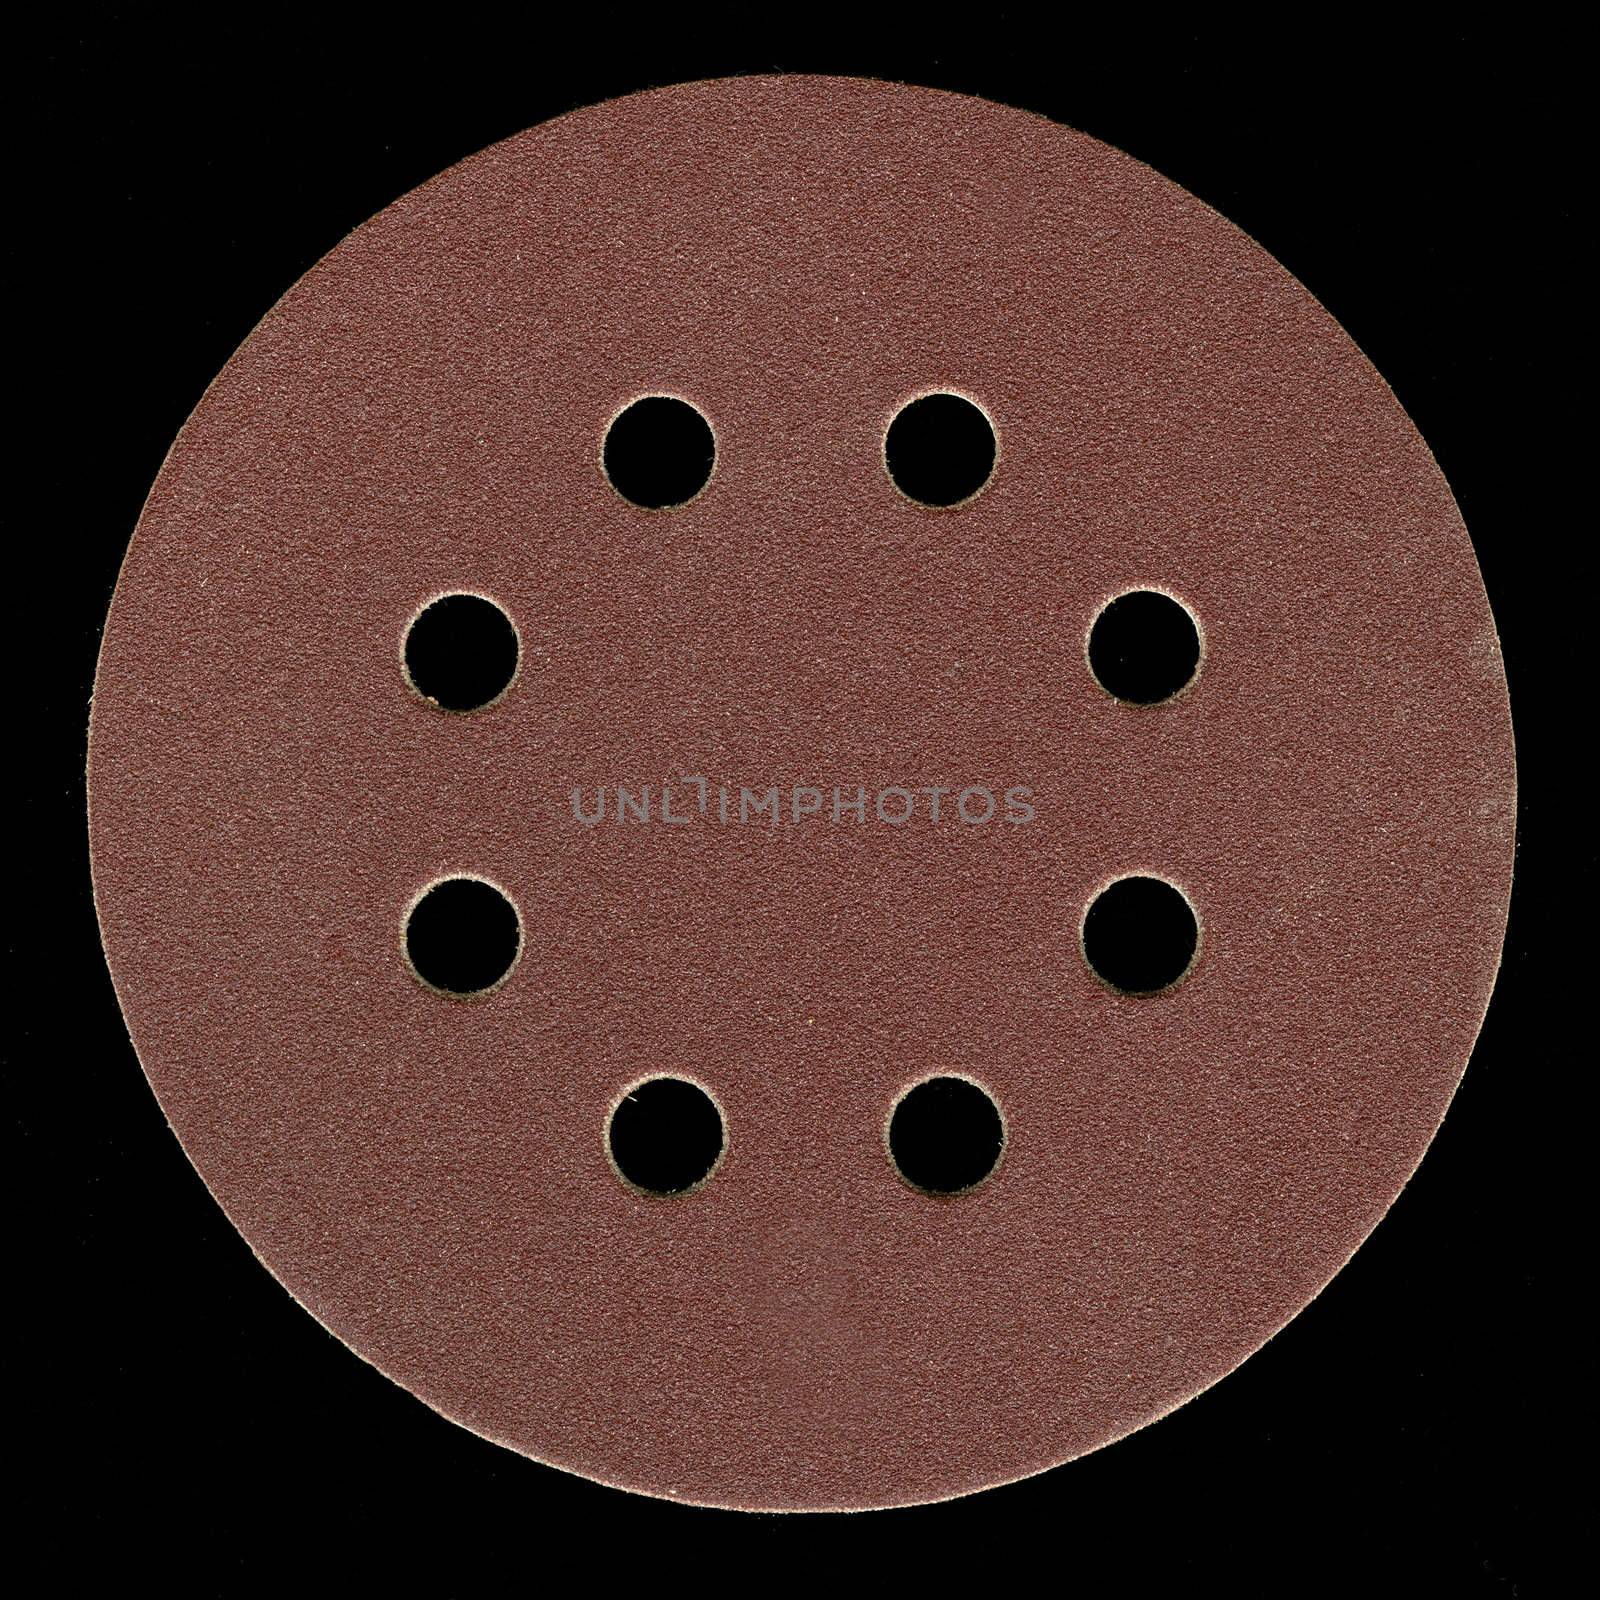 all purpose, fine grit, adhesive backed sanding disk with venting holes on black background